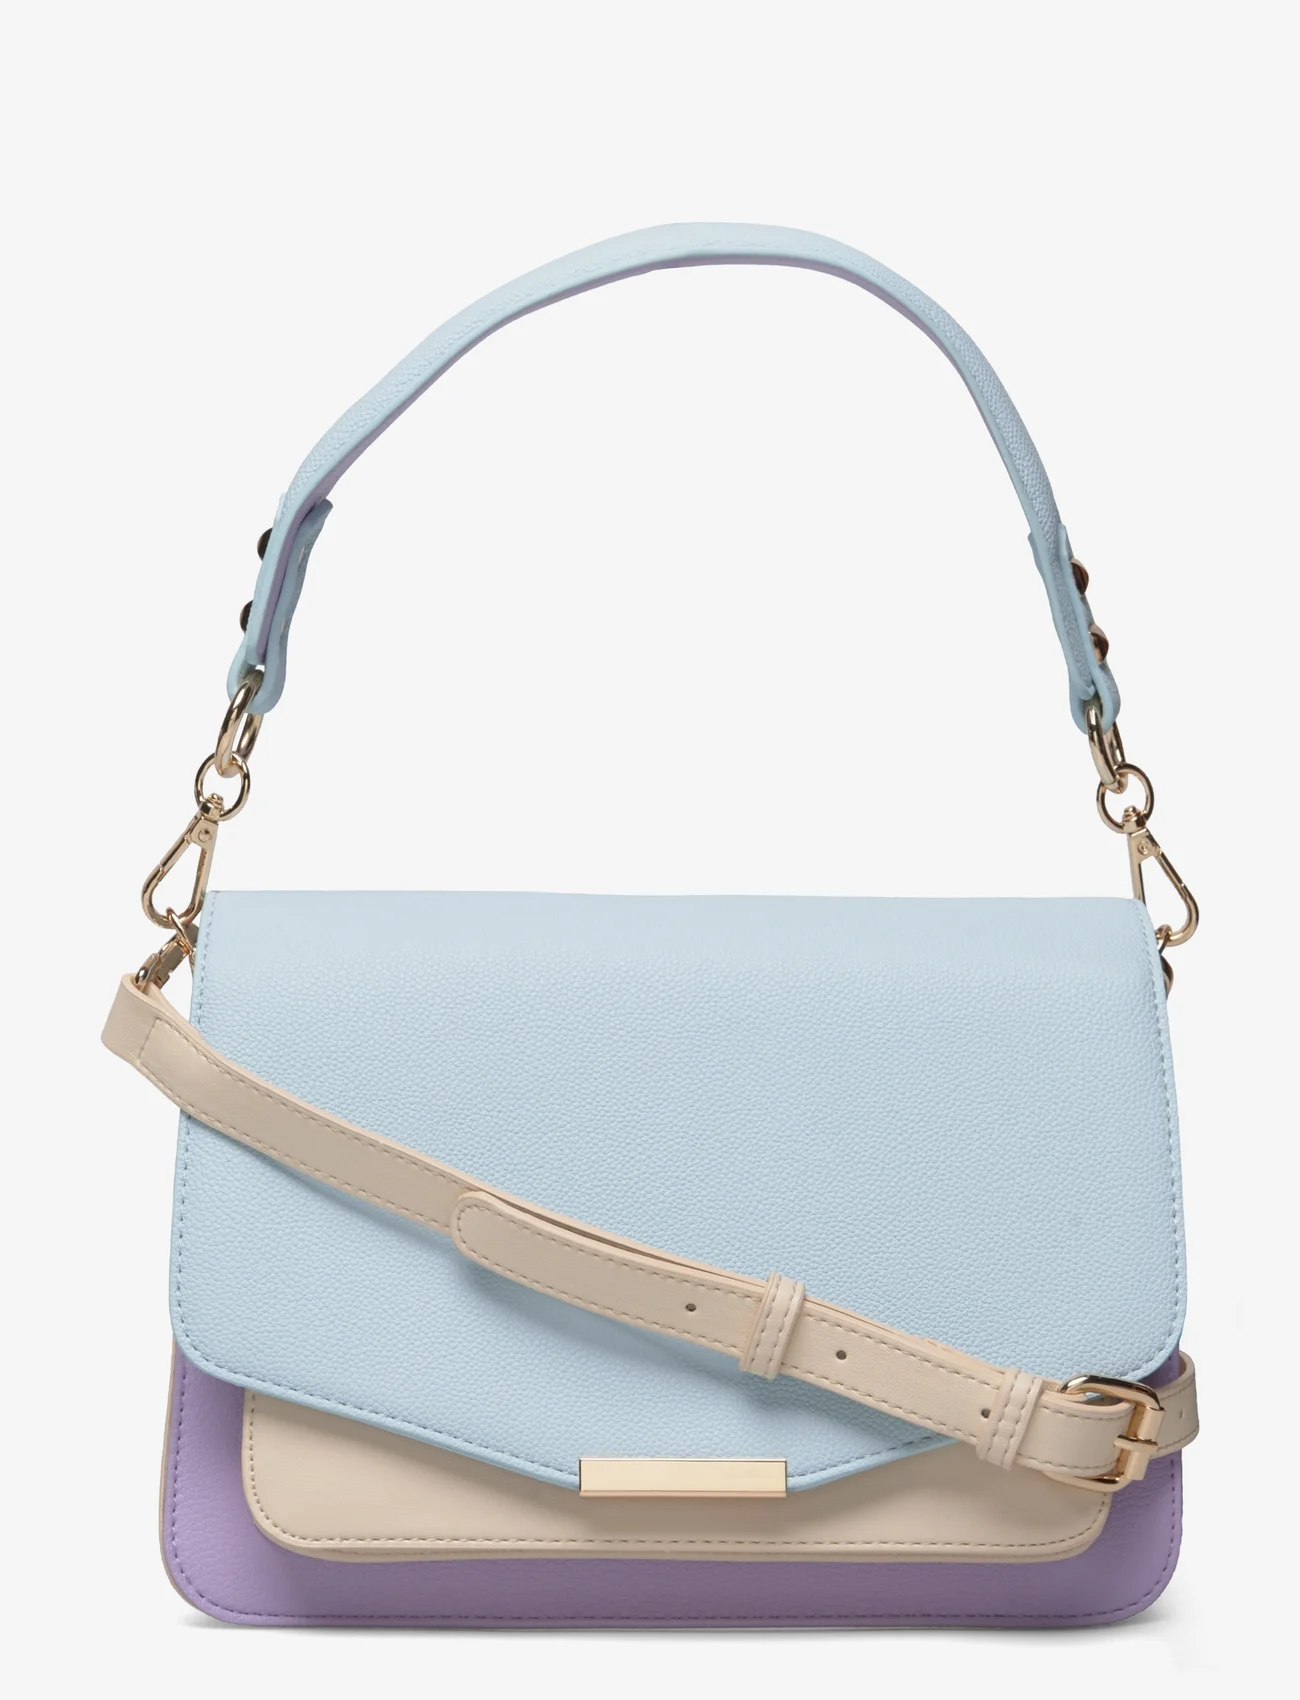 Noella - Blanca Multi Compartment Bag - party wear at outlet prices - lightblue/lavender/offwhite - 0